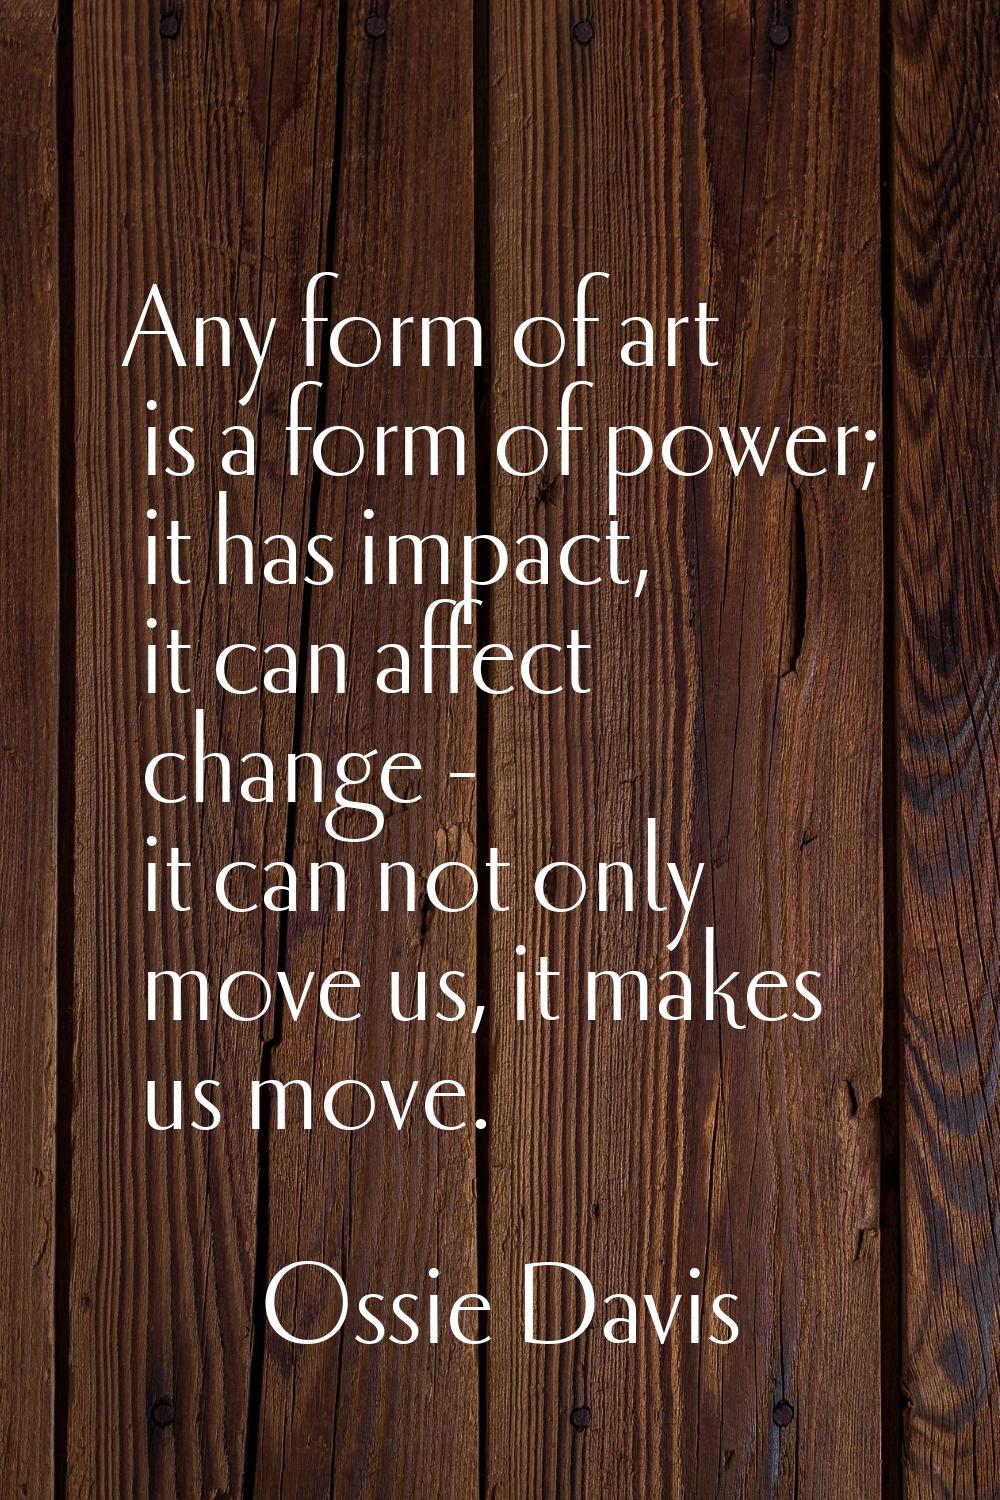 Any form of art is a form of power; it has impact, it can affect change - it can not only move us, 